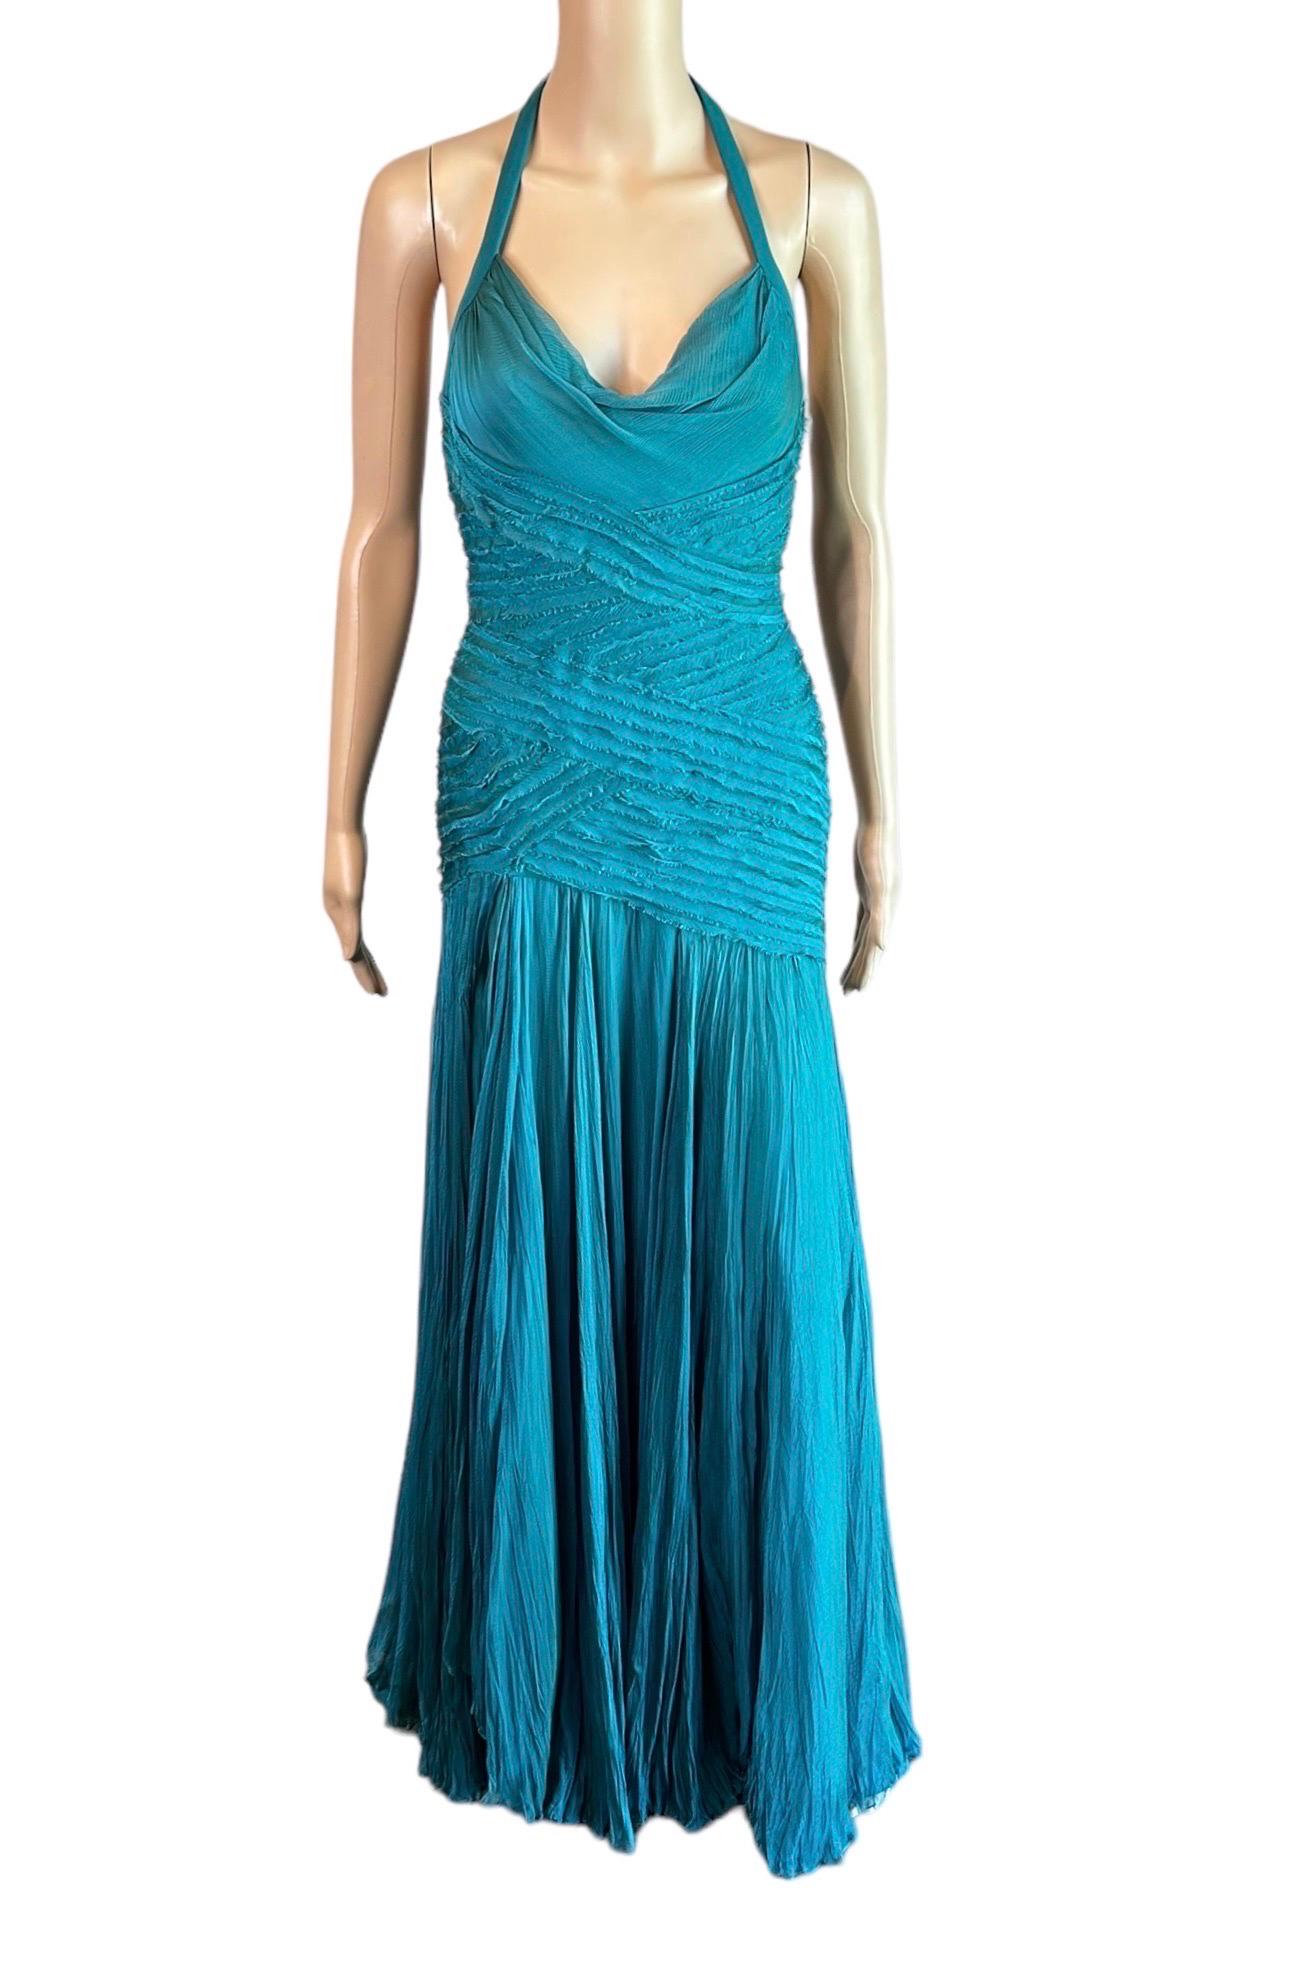 Versace F/W 2005 Runway Campaign Halter High Slit Slip Evening Dress Gown  For Sale 7